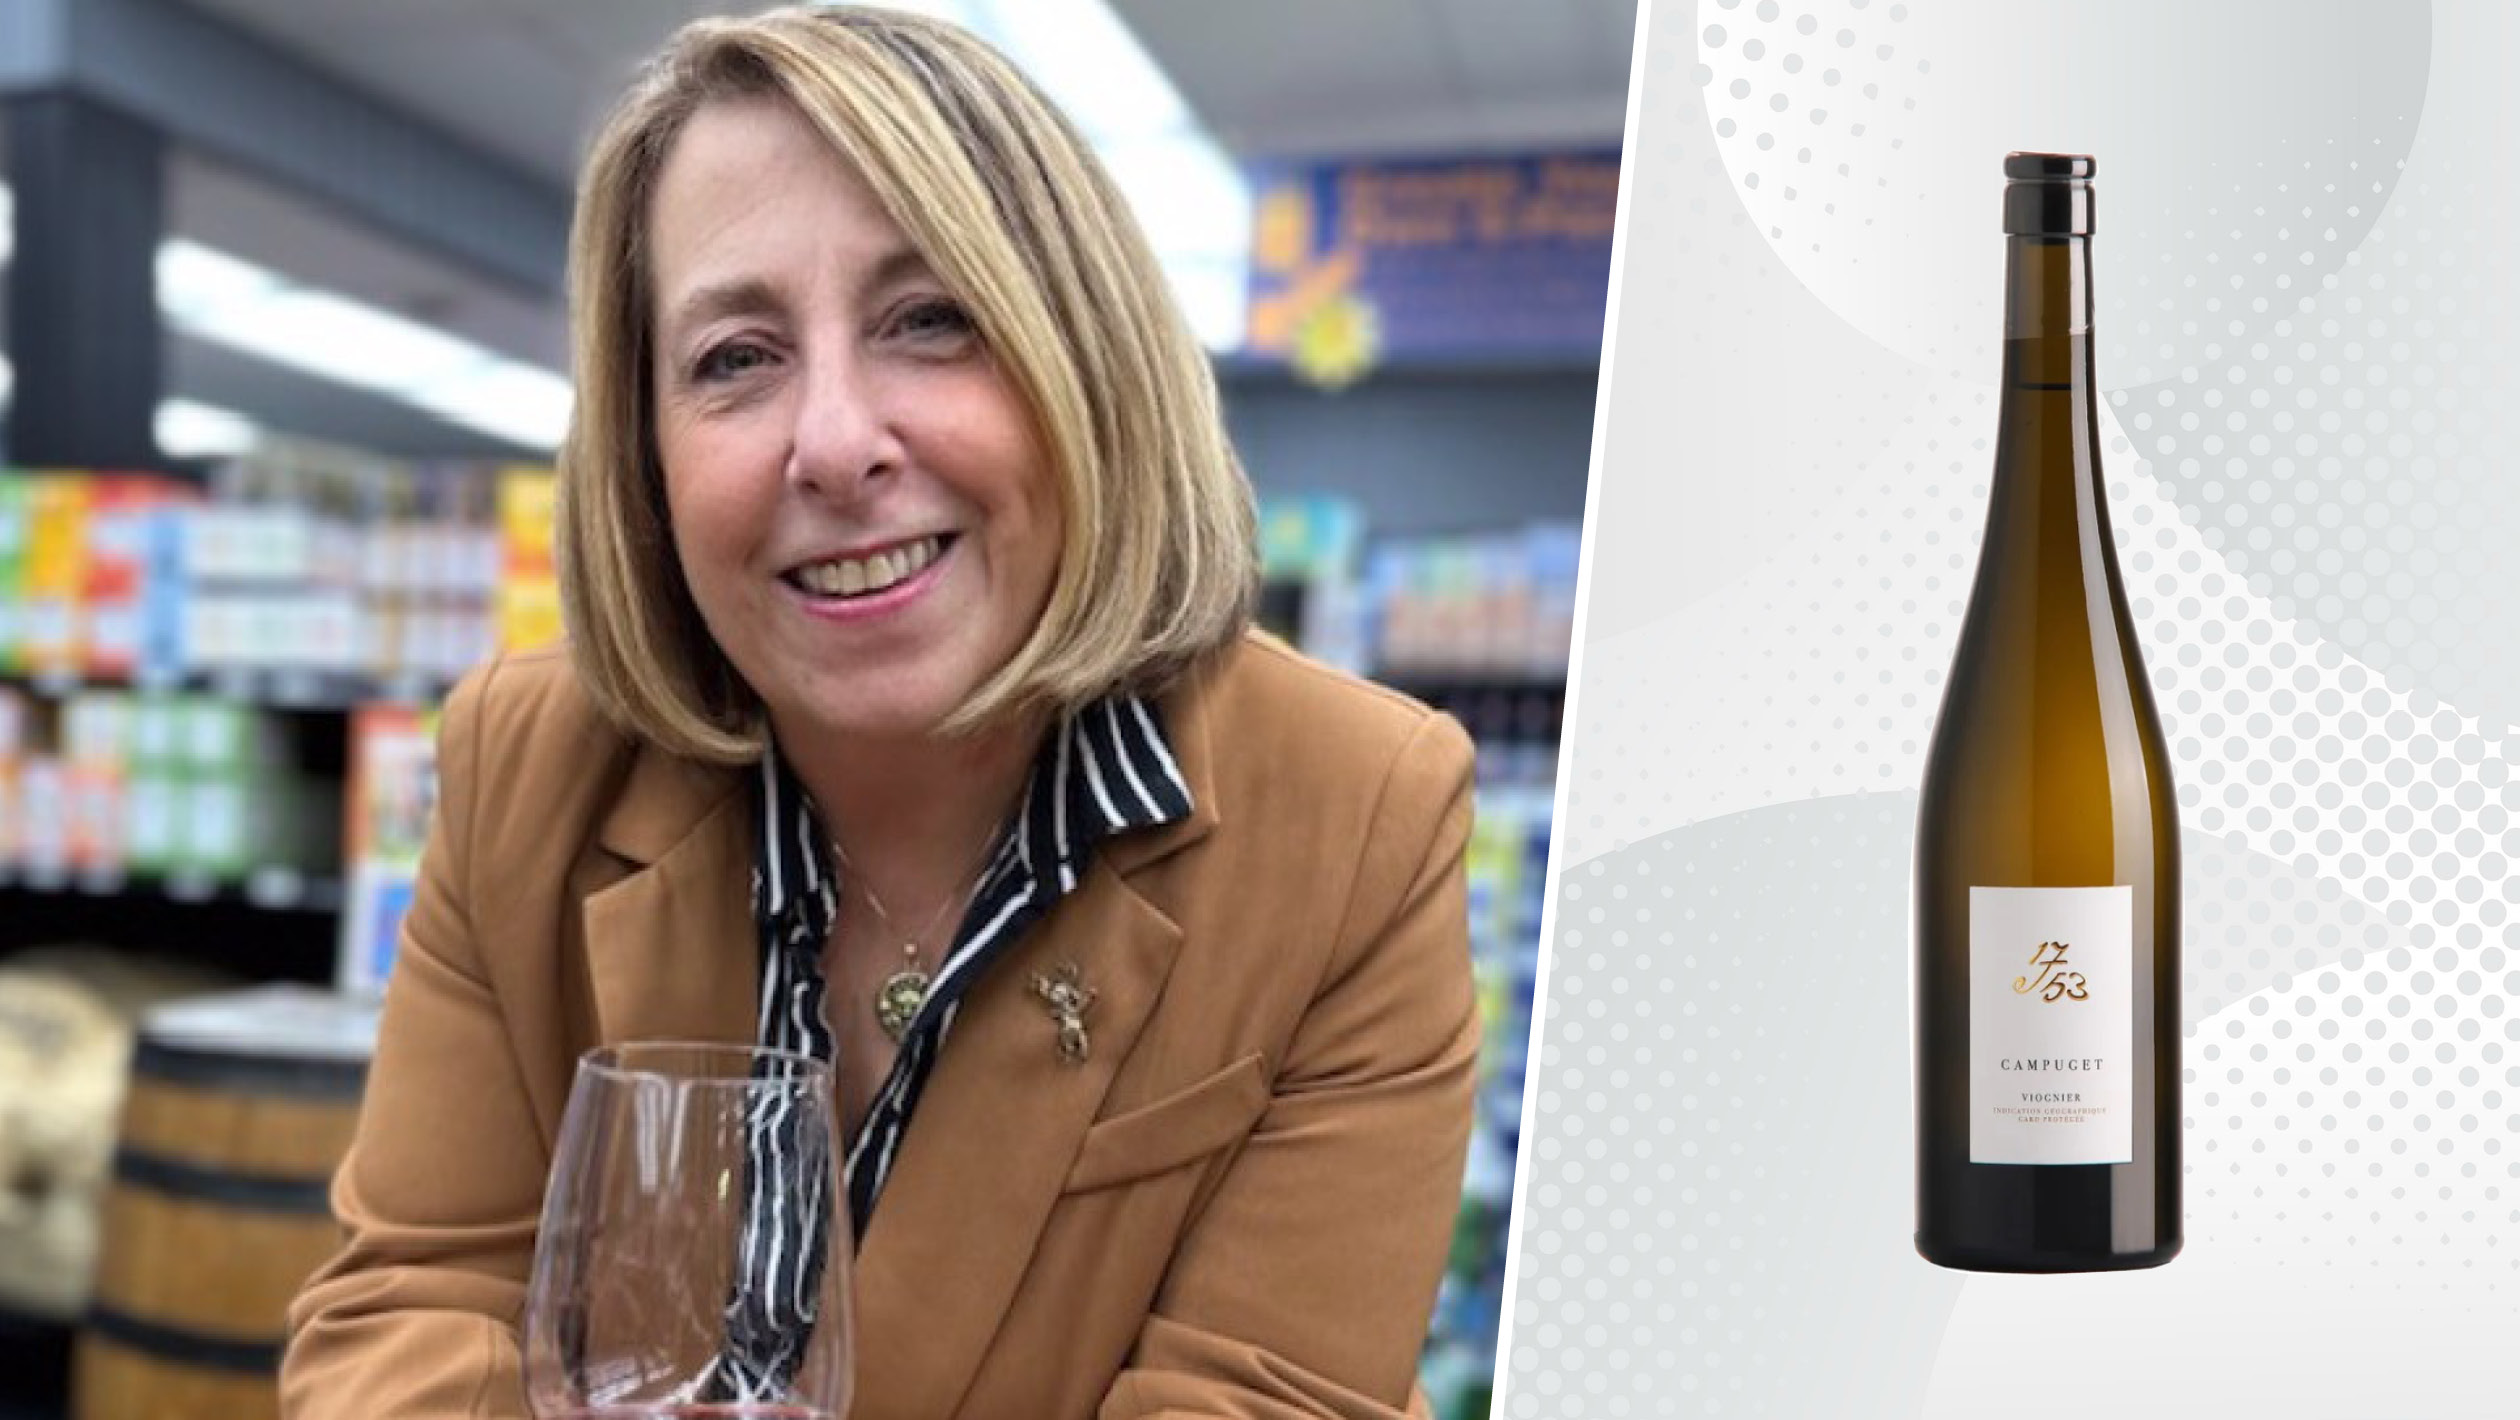 From left to right: Nancy Sabatini, the wine director of Mainstreet Wines and Spirits; Château de Campuget ‘1753’ Viognier. Photos courtesy of Nancy Sabatini.